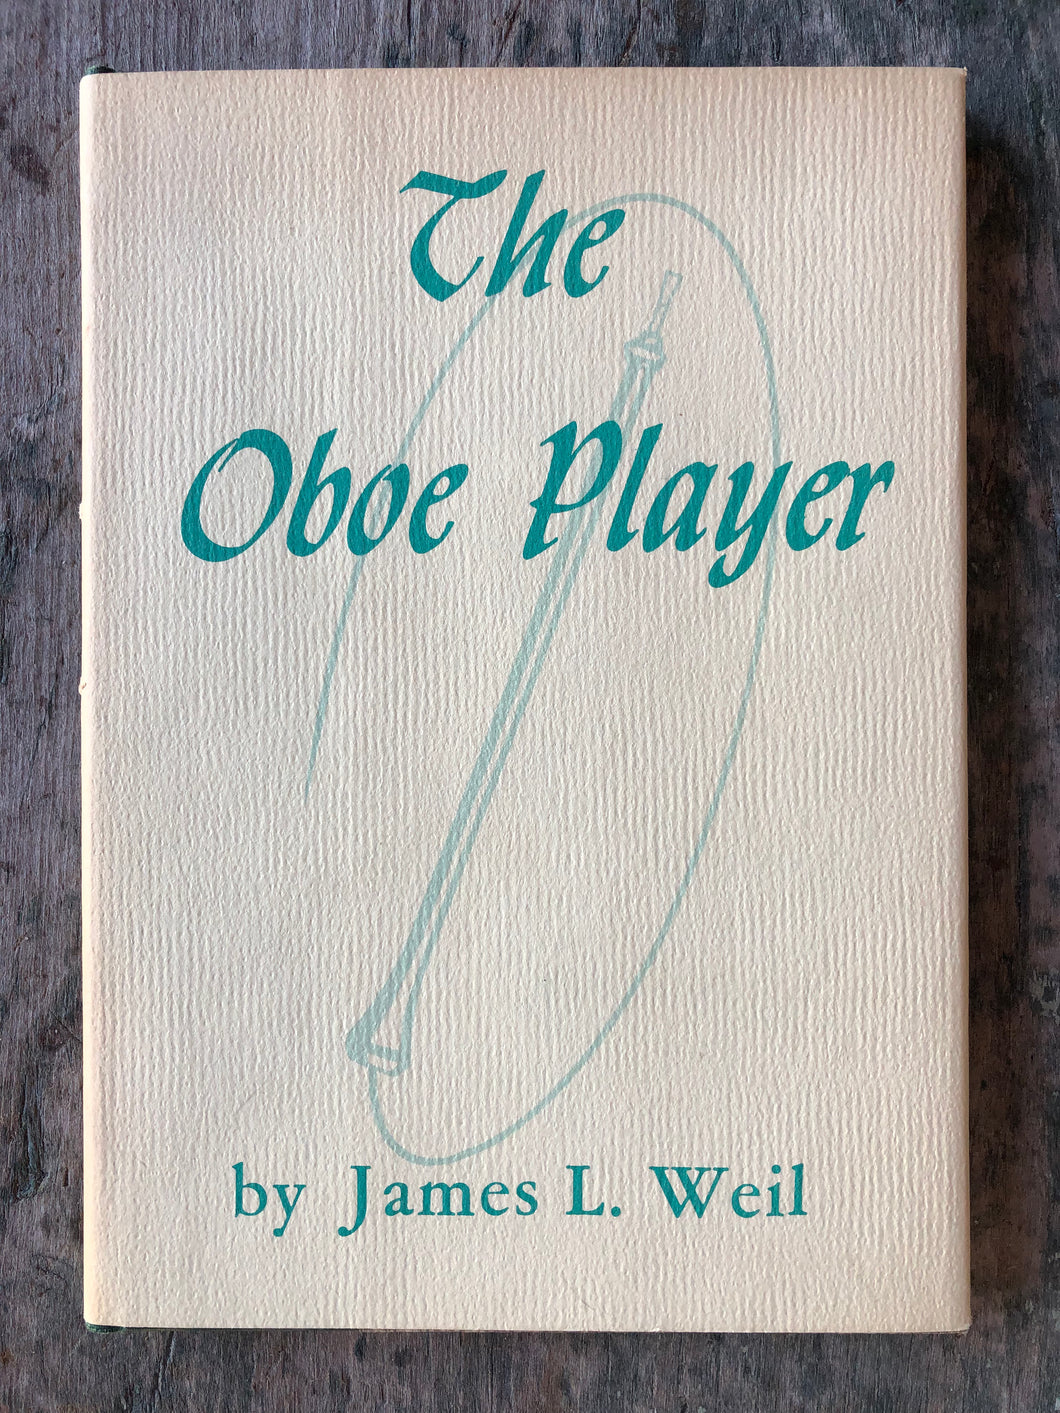 The Oboe Player and other poems by James L. Weil